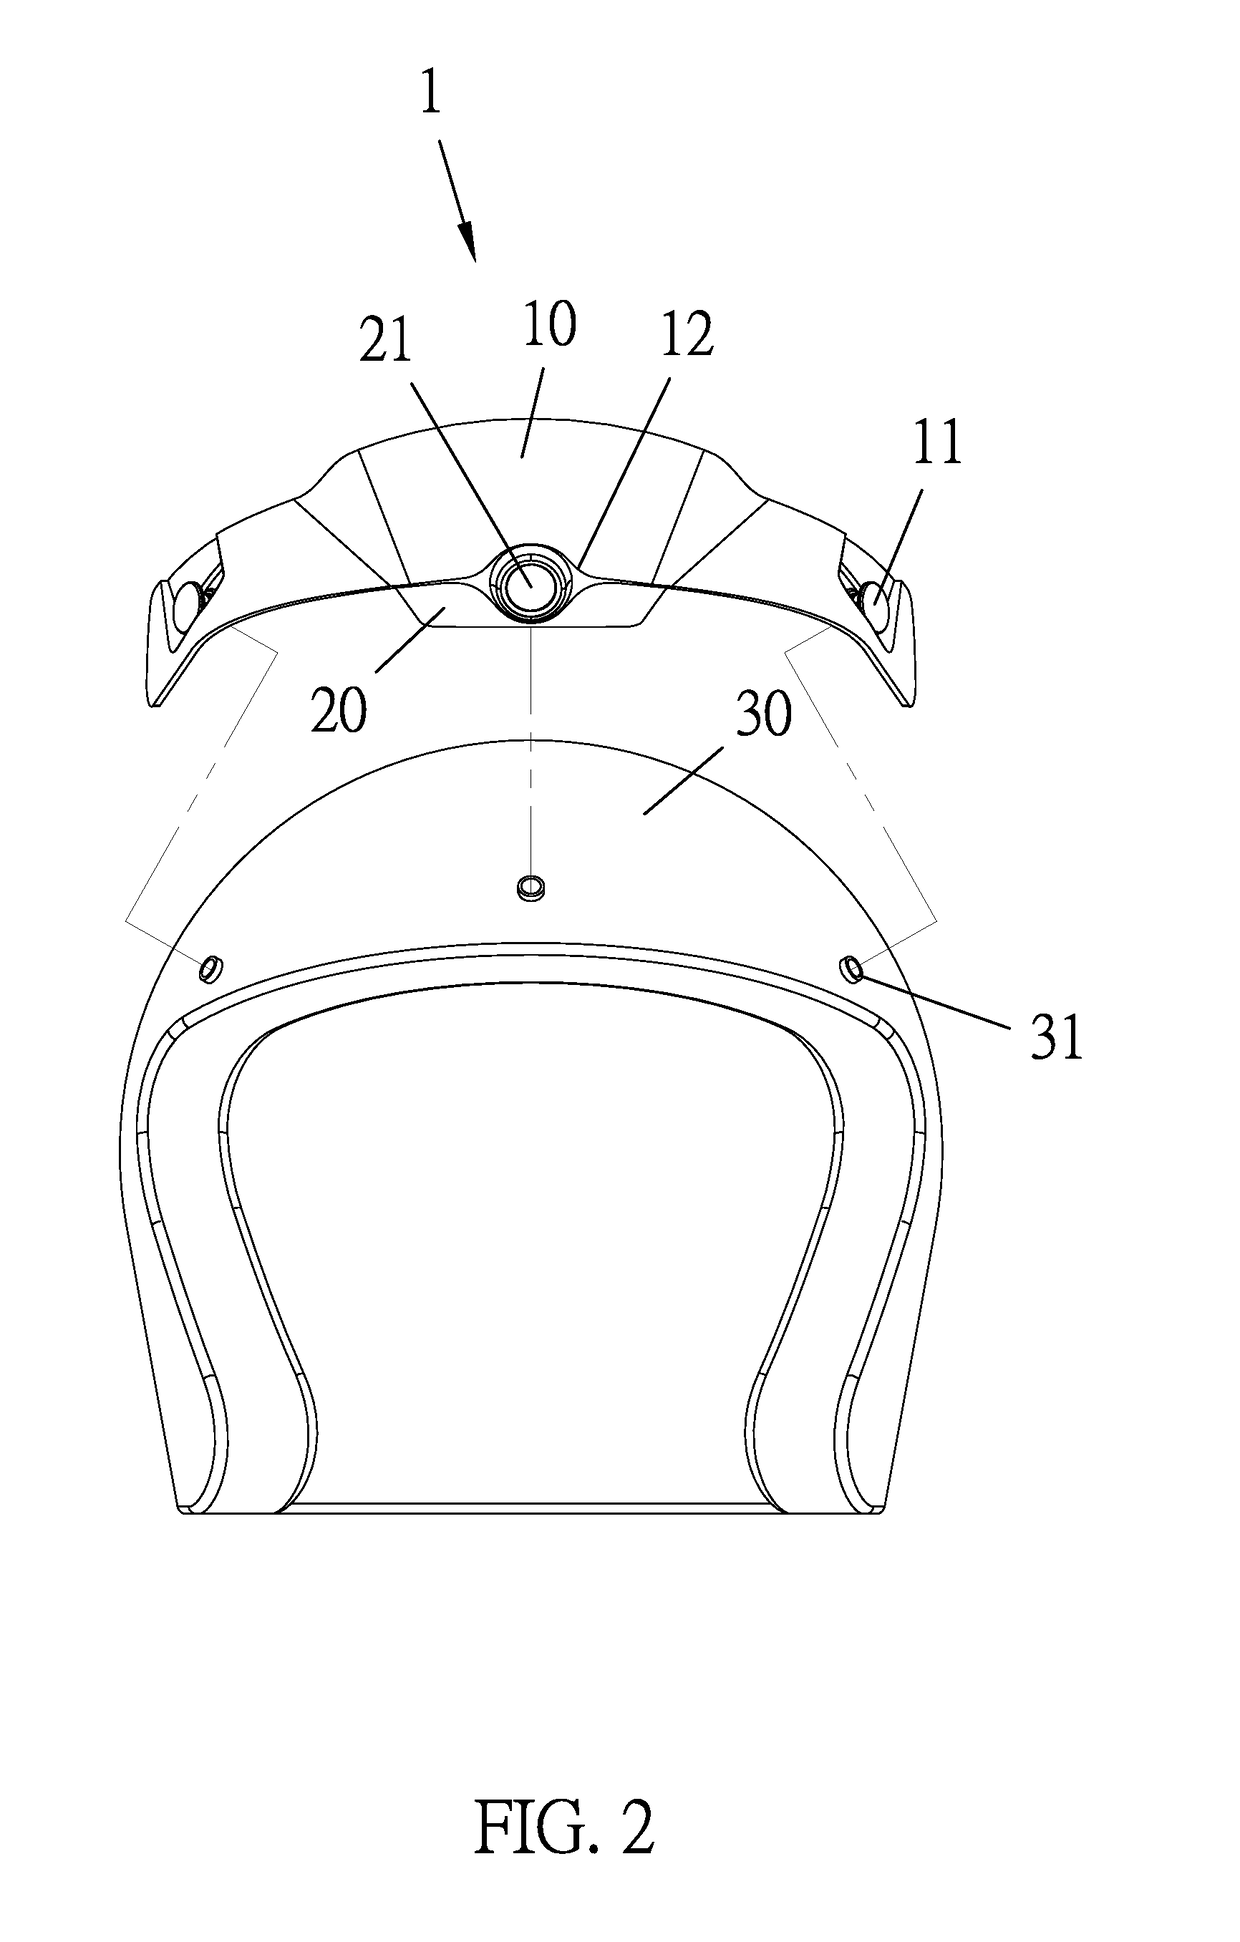 Structure for fixing riding recorder with helmet visor fastener